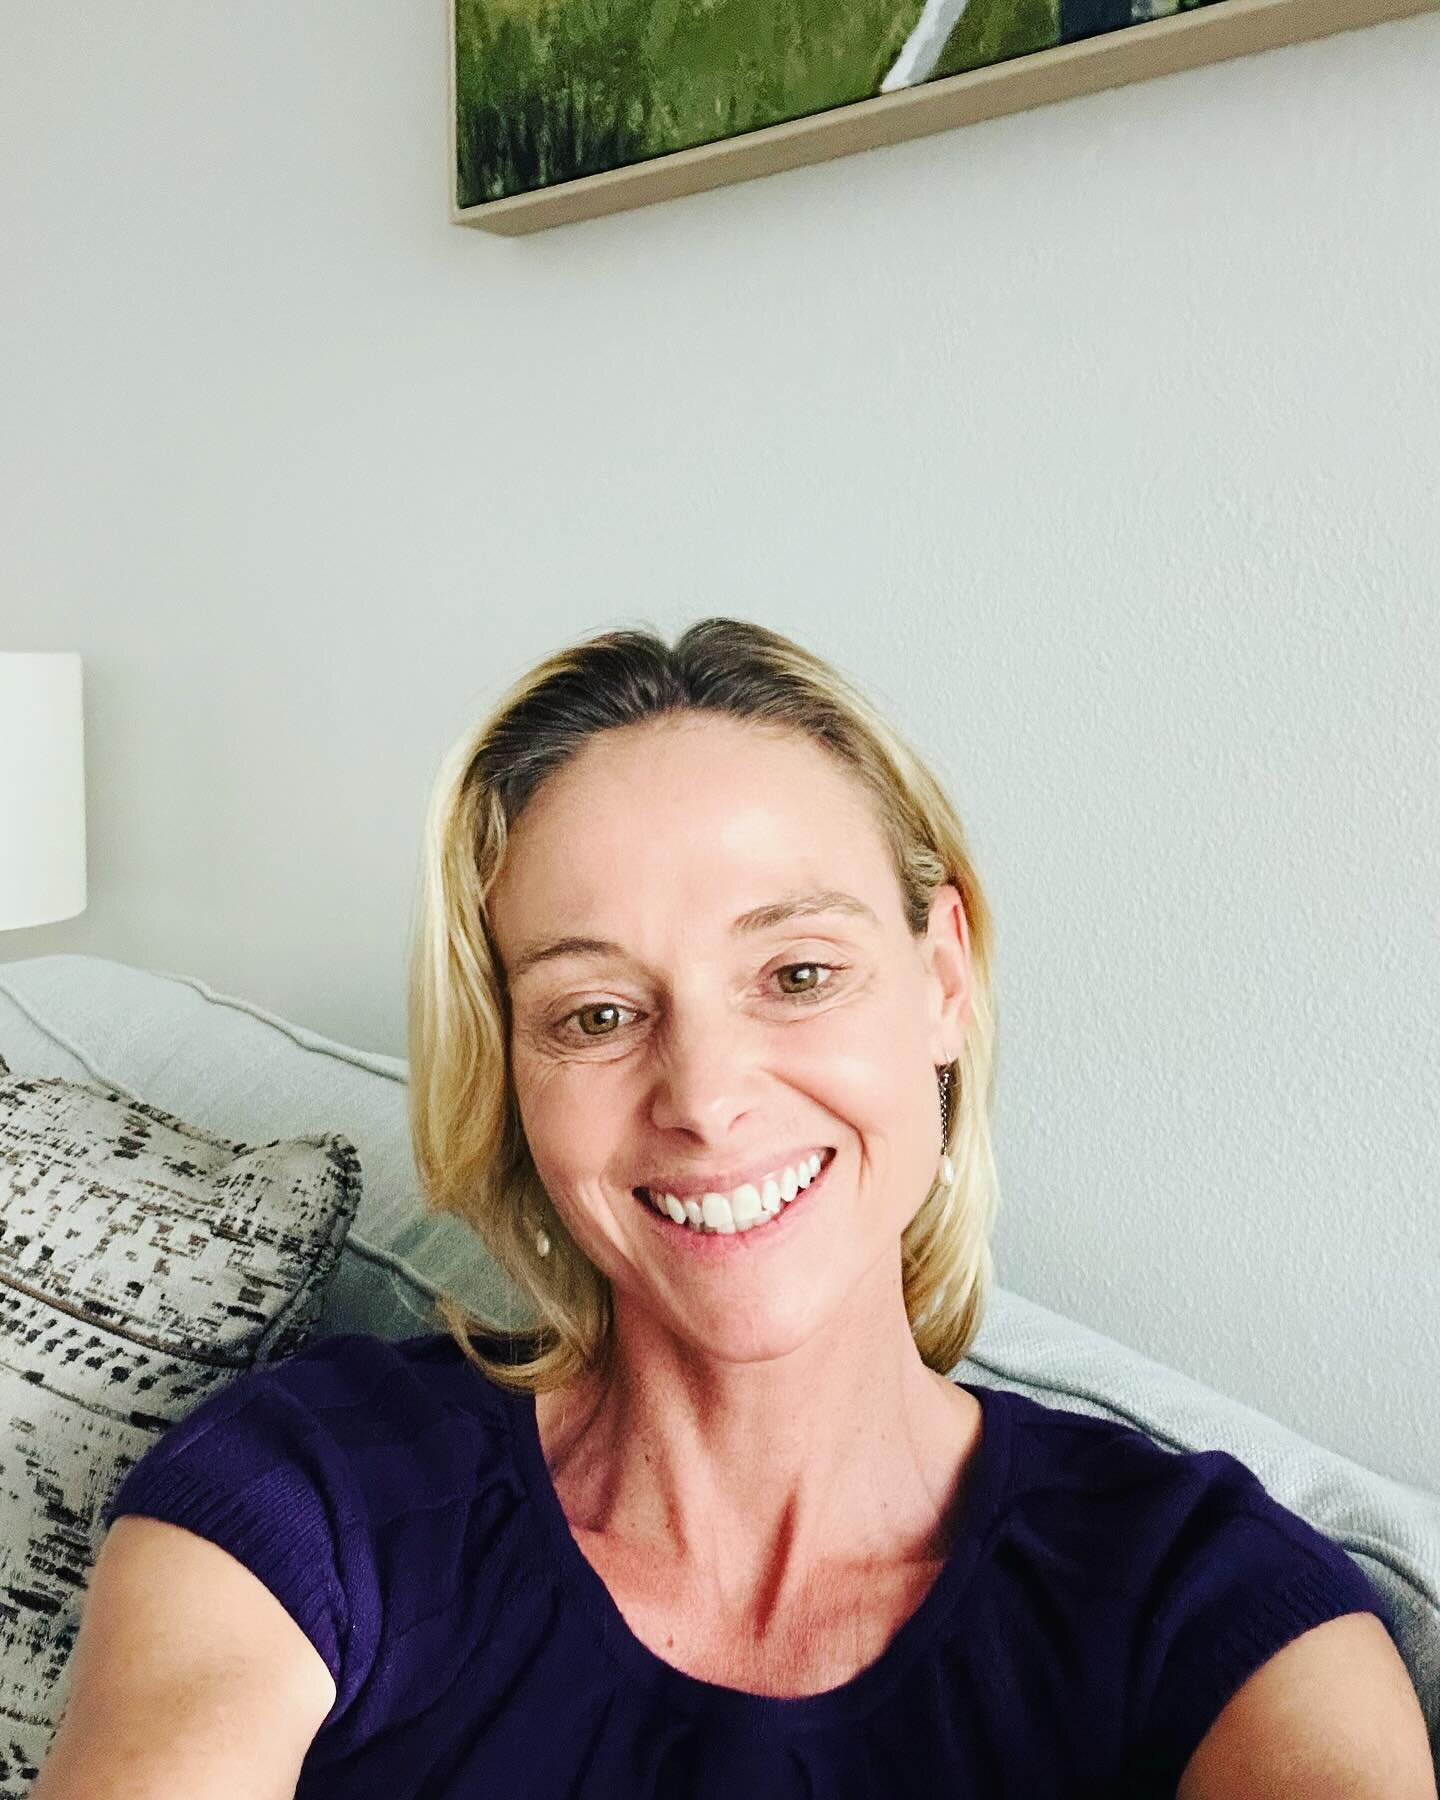 Feeling great on this Friday evening. I love helping couples communicate, connect and bond. 

#encinitastherapy #couplestherapy #love #intimacy #connection #relationships